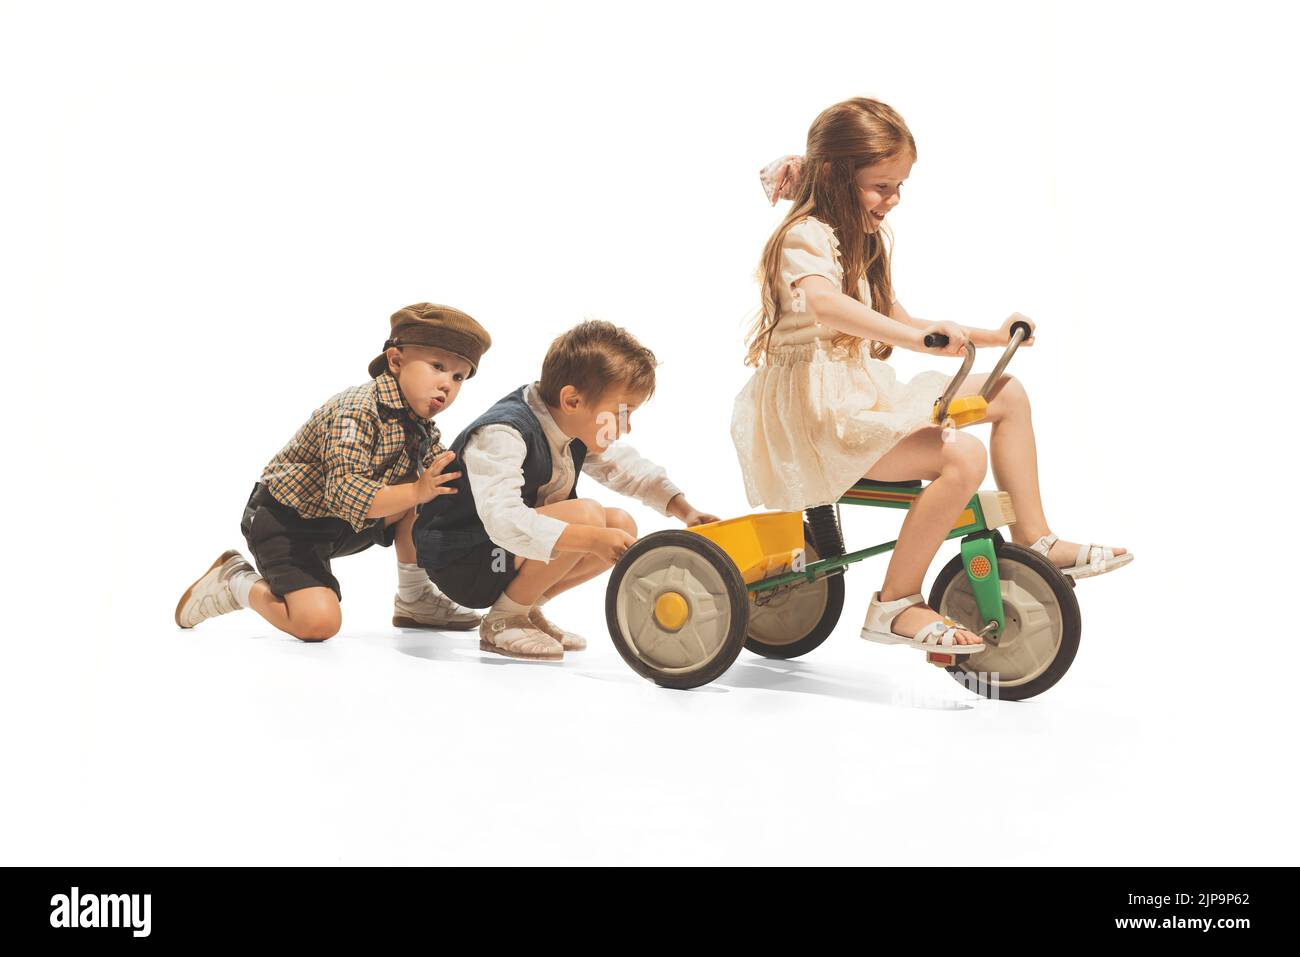 Portrait of three children, boys pulling bike with riding girl, playing together isolated over white studio background Stock Photo